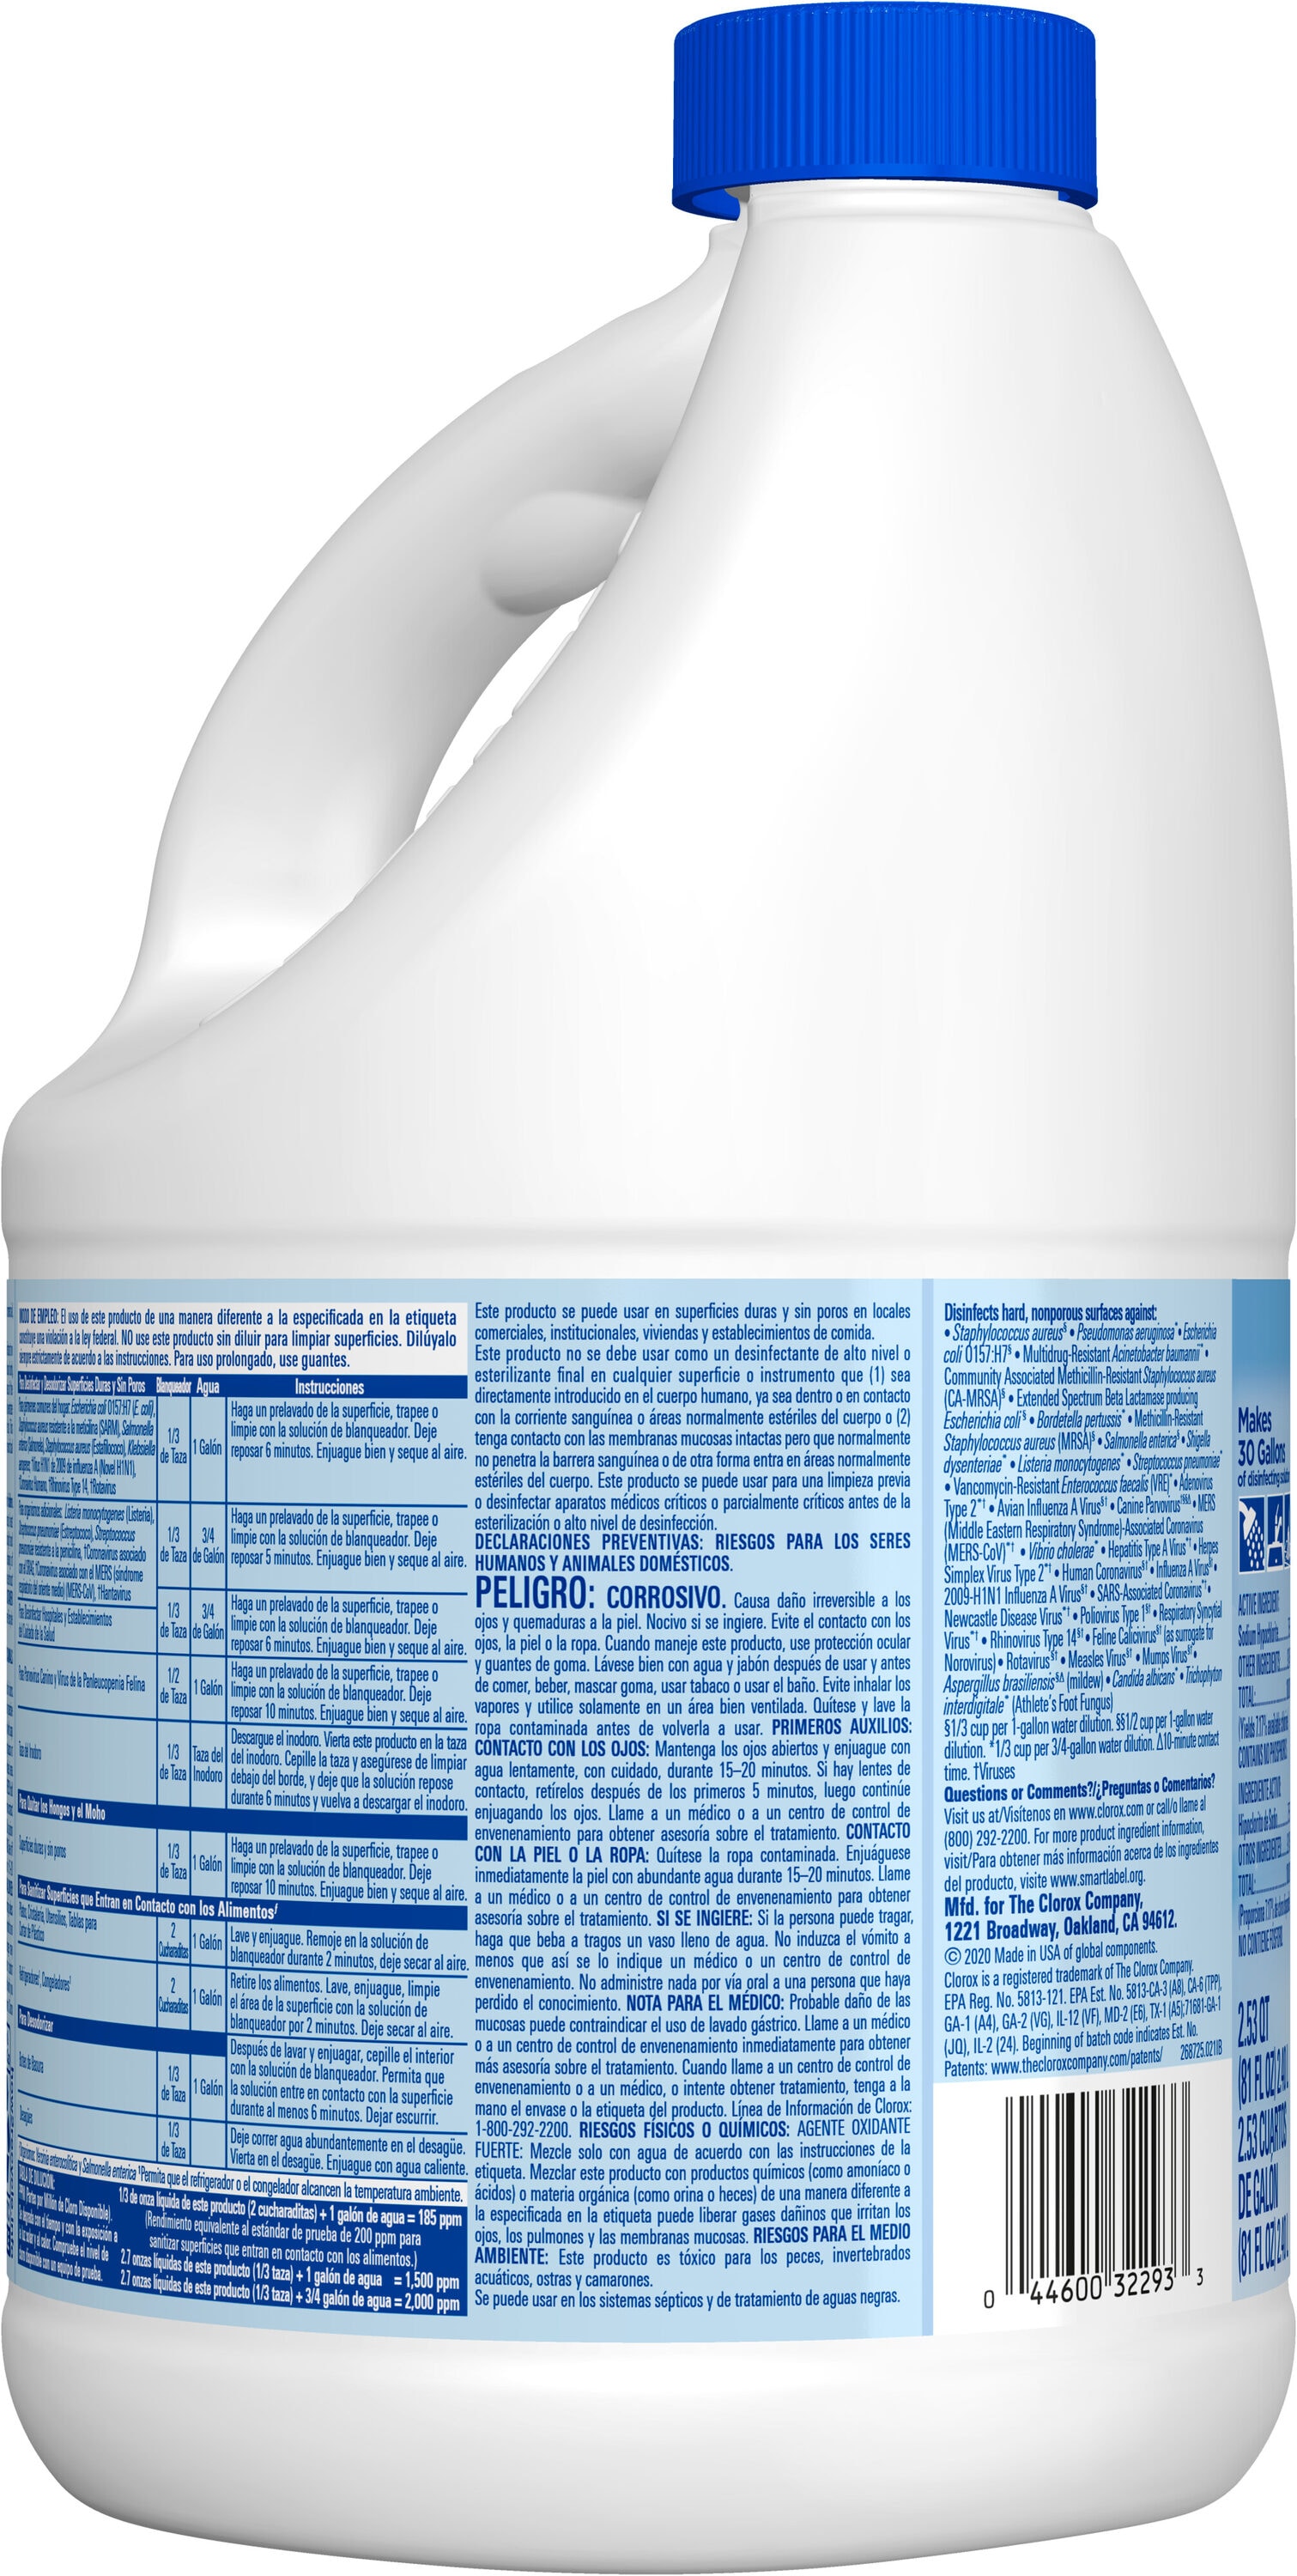 81 oz. Concentrated Germicidal Disinfecting Bleach Cleaner